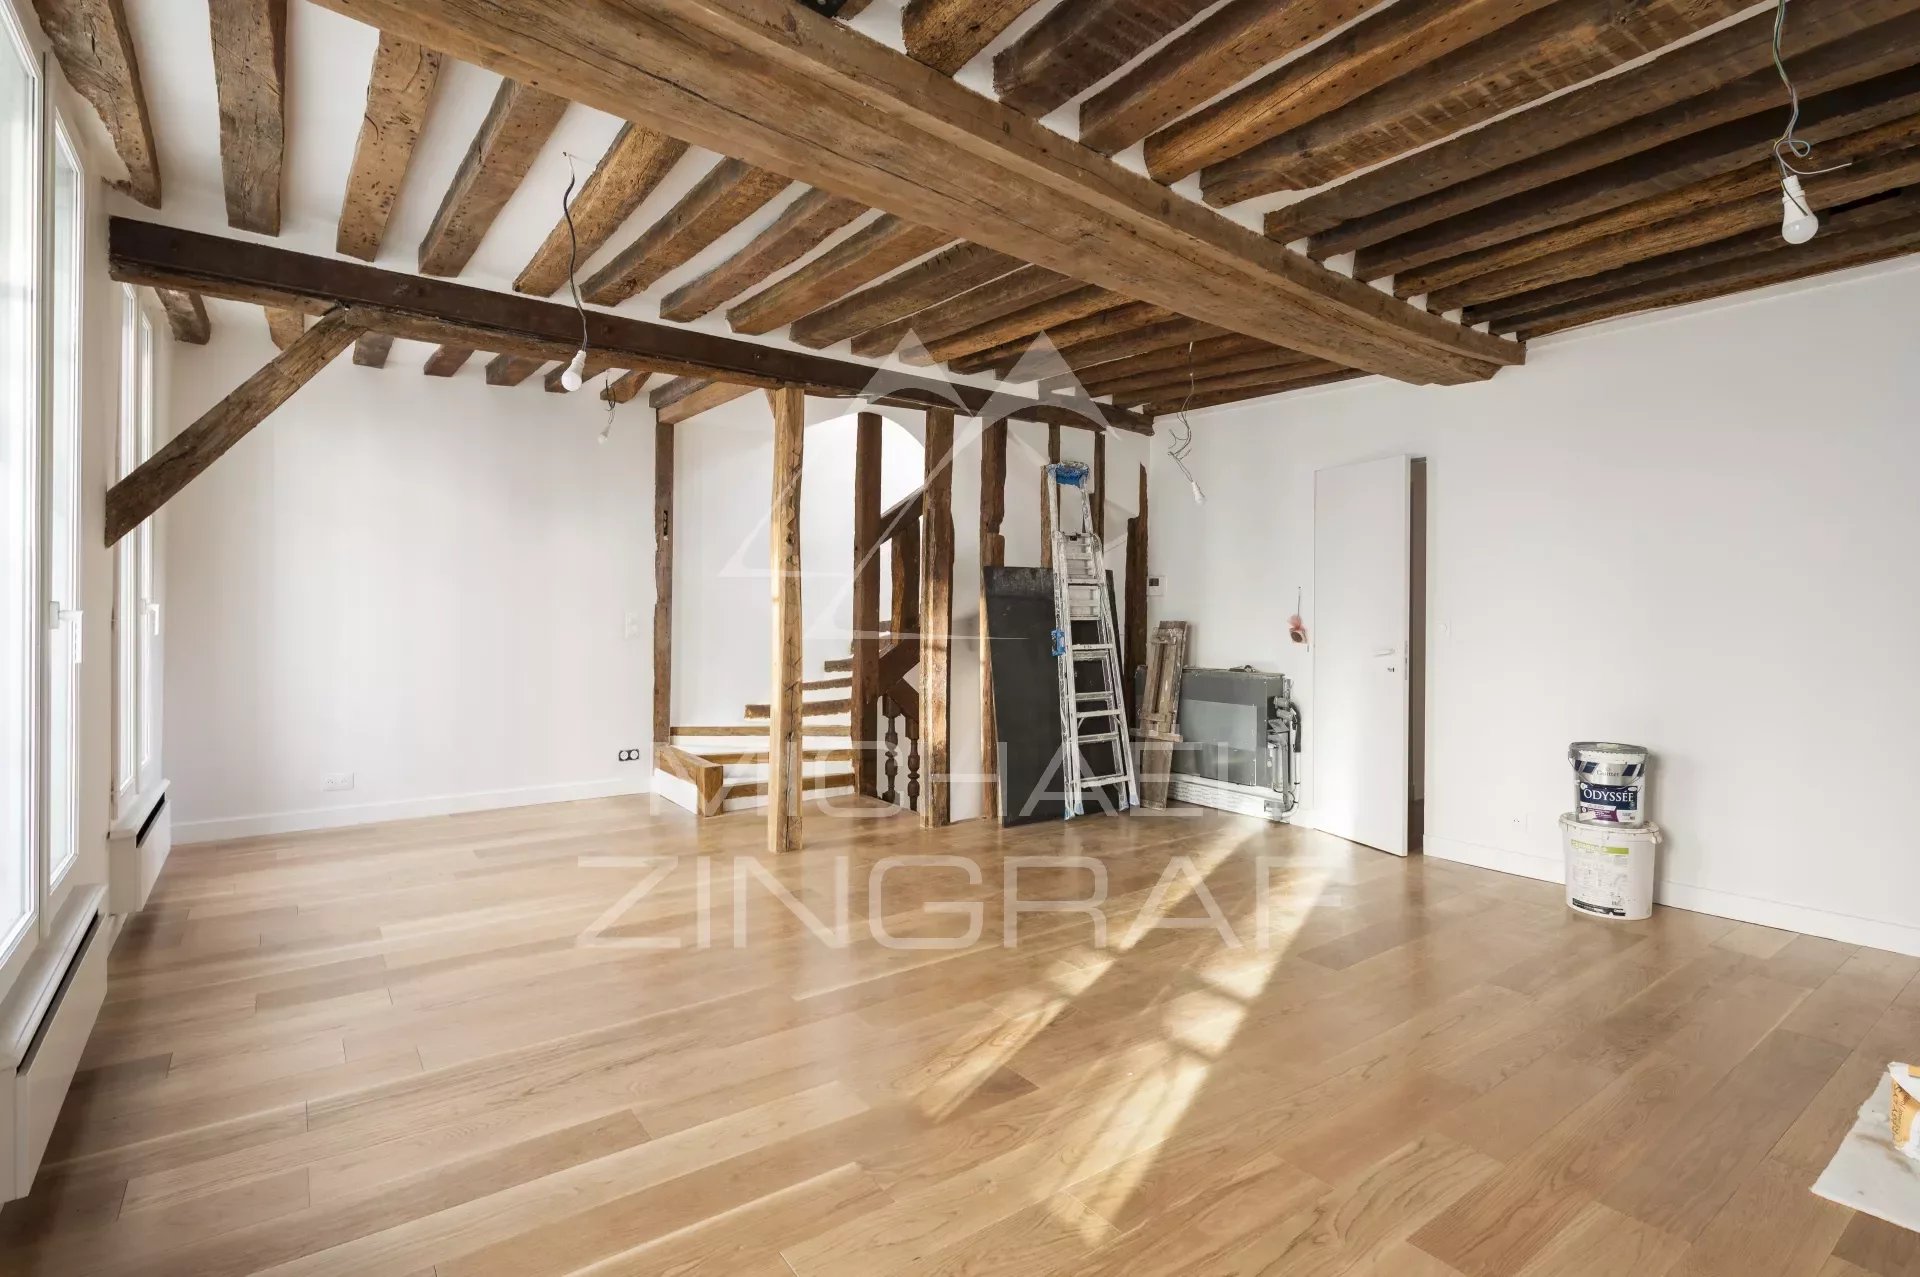 Prestigious building with commercial and residential sections in the Marais district